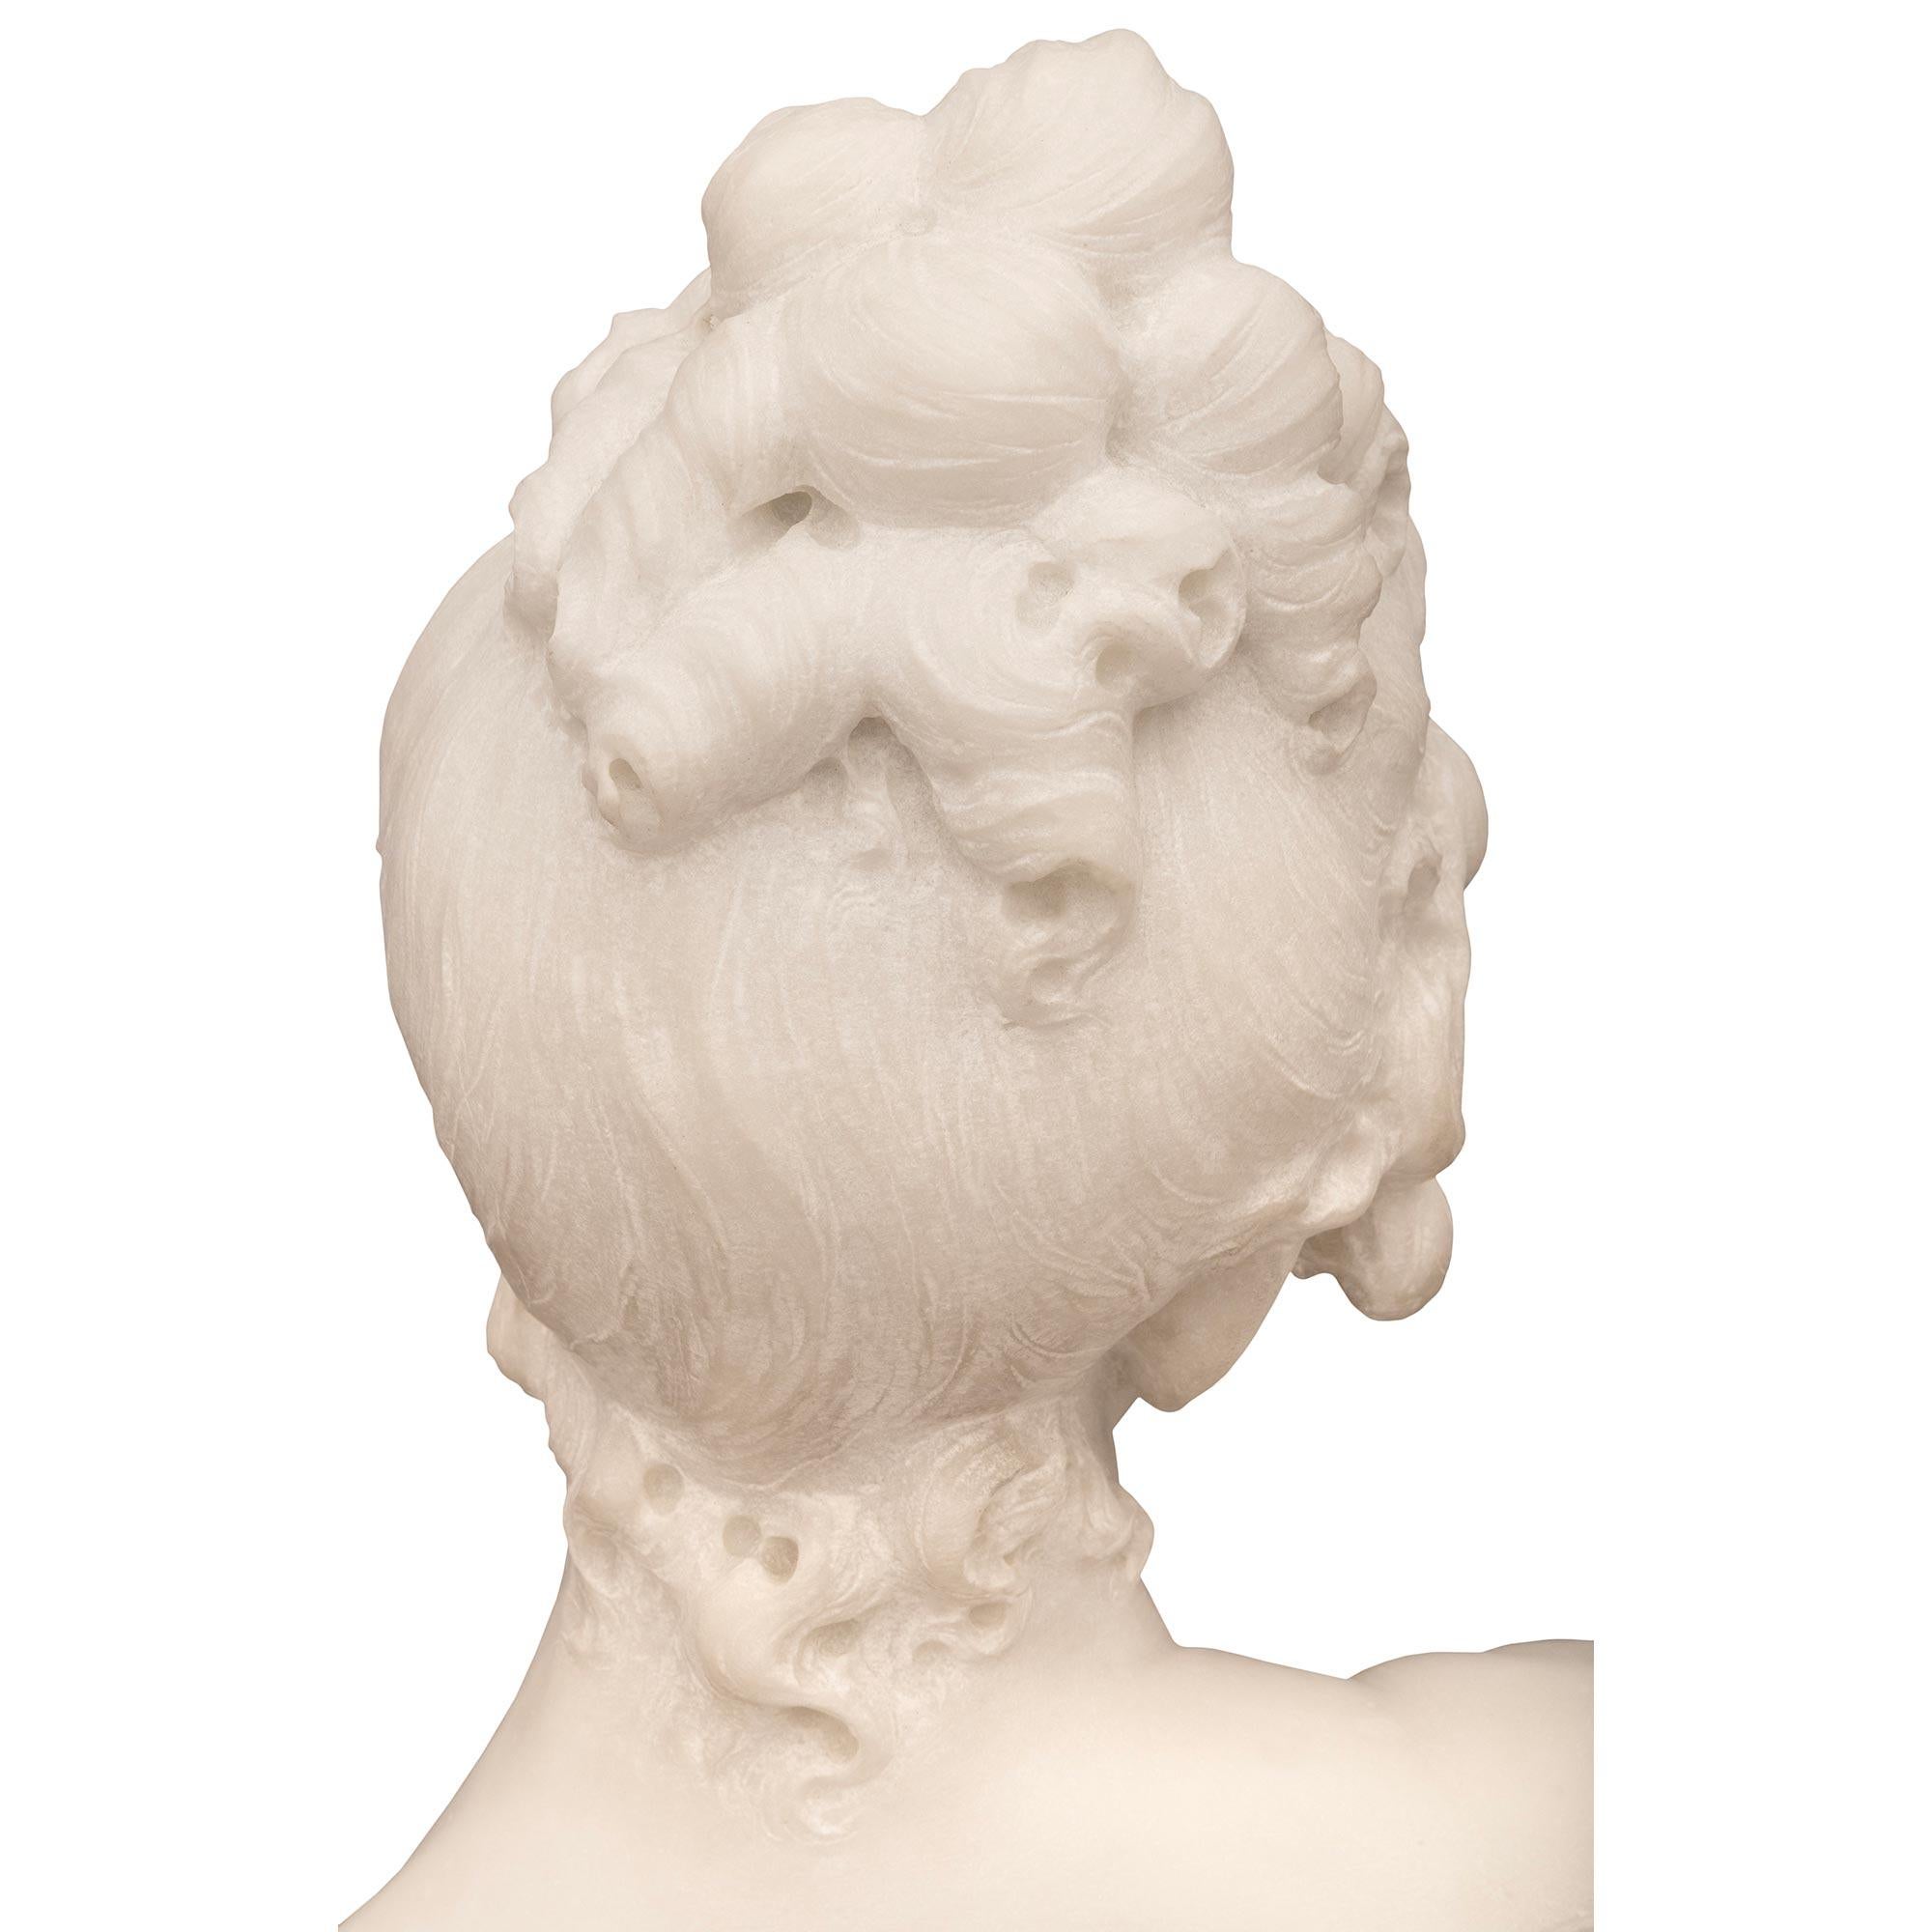 Italian 19th Century White Carrara Marble Bust of a Young Maiden For Sale 3